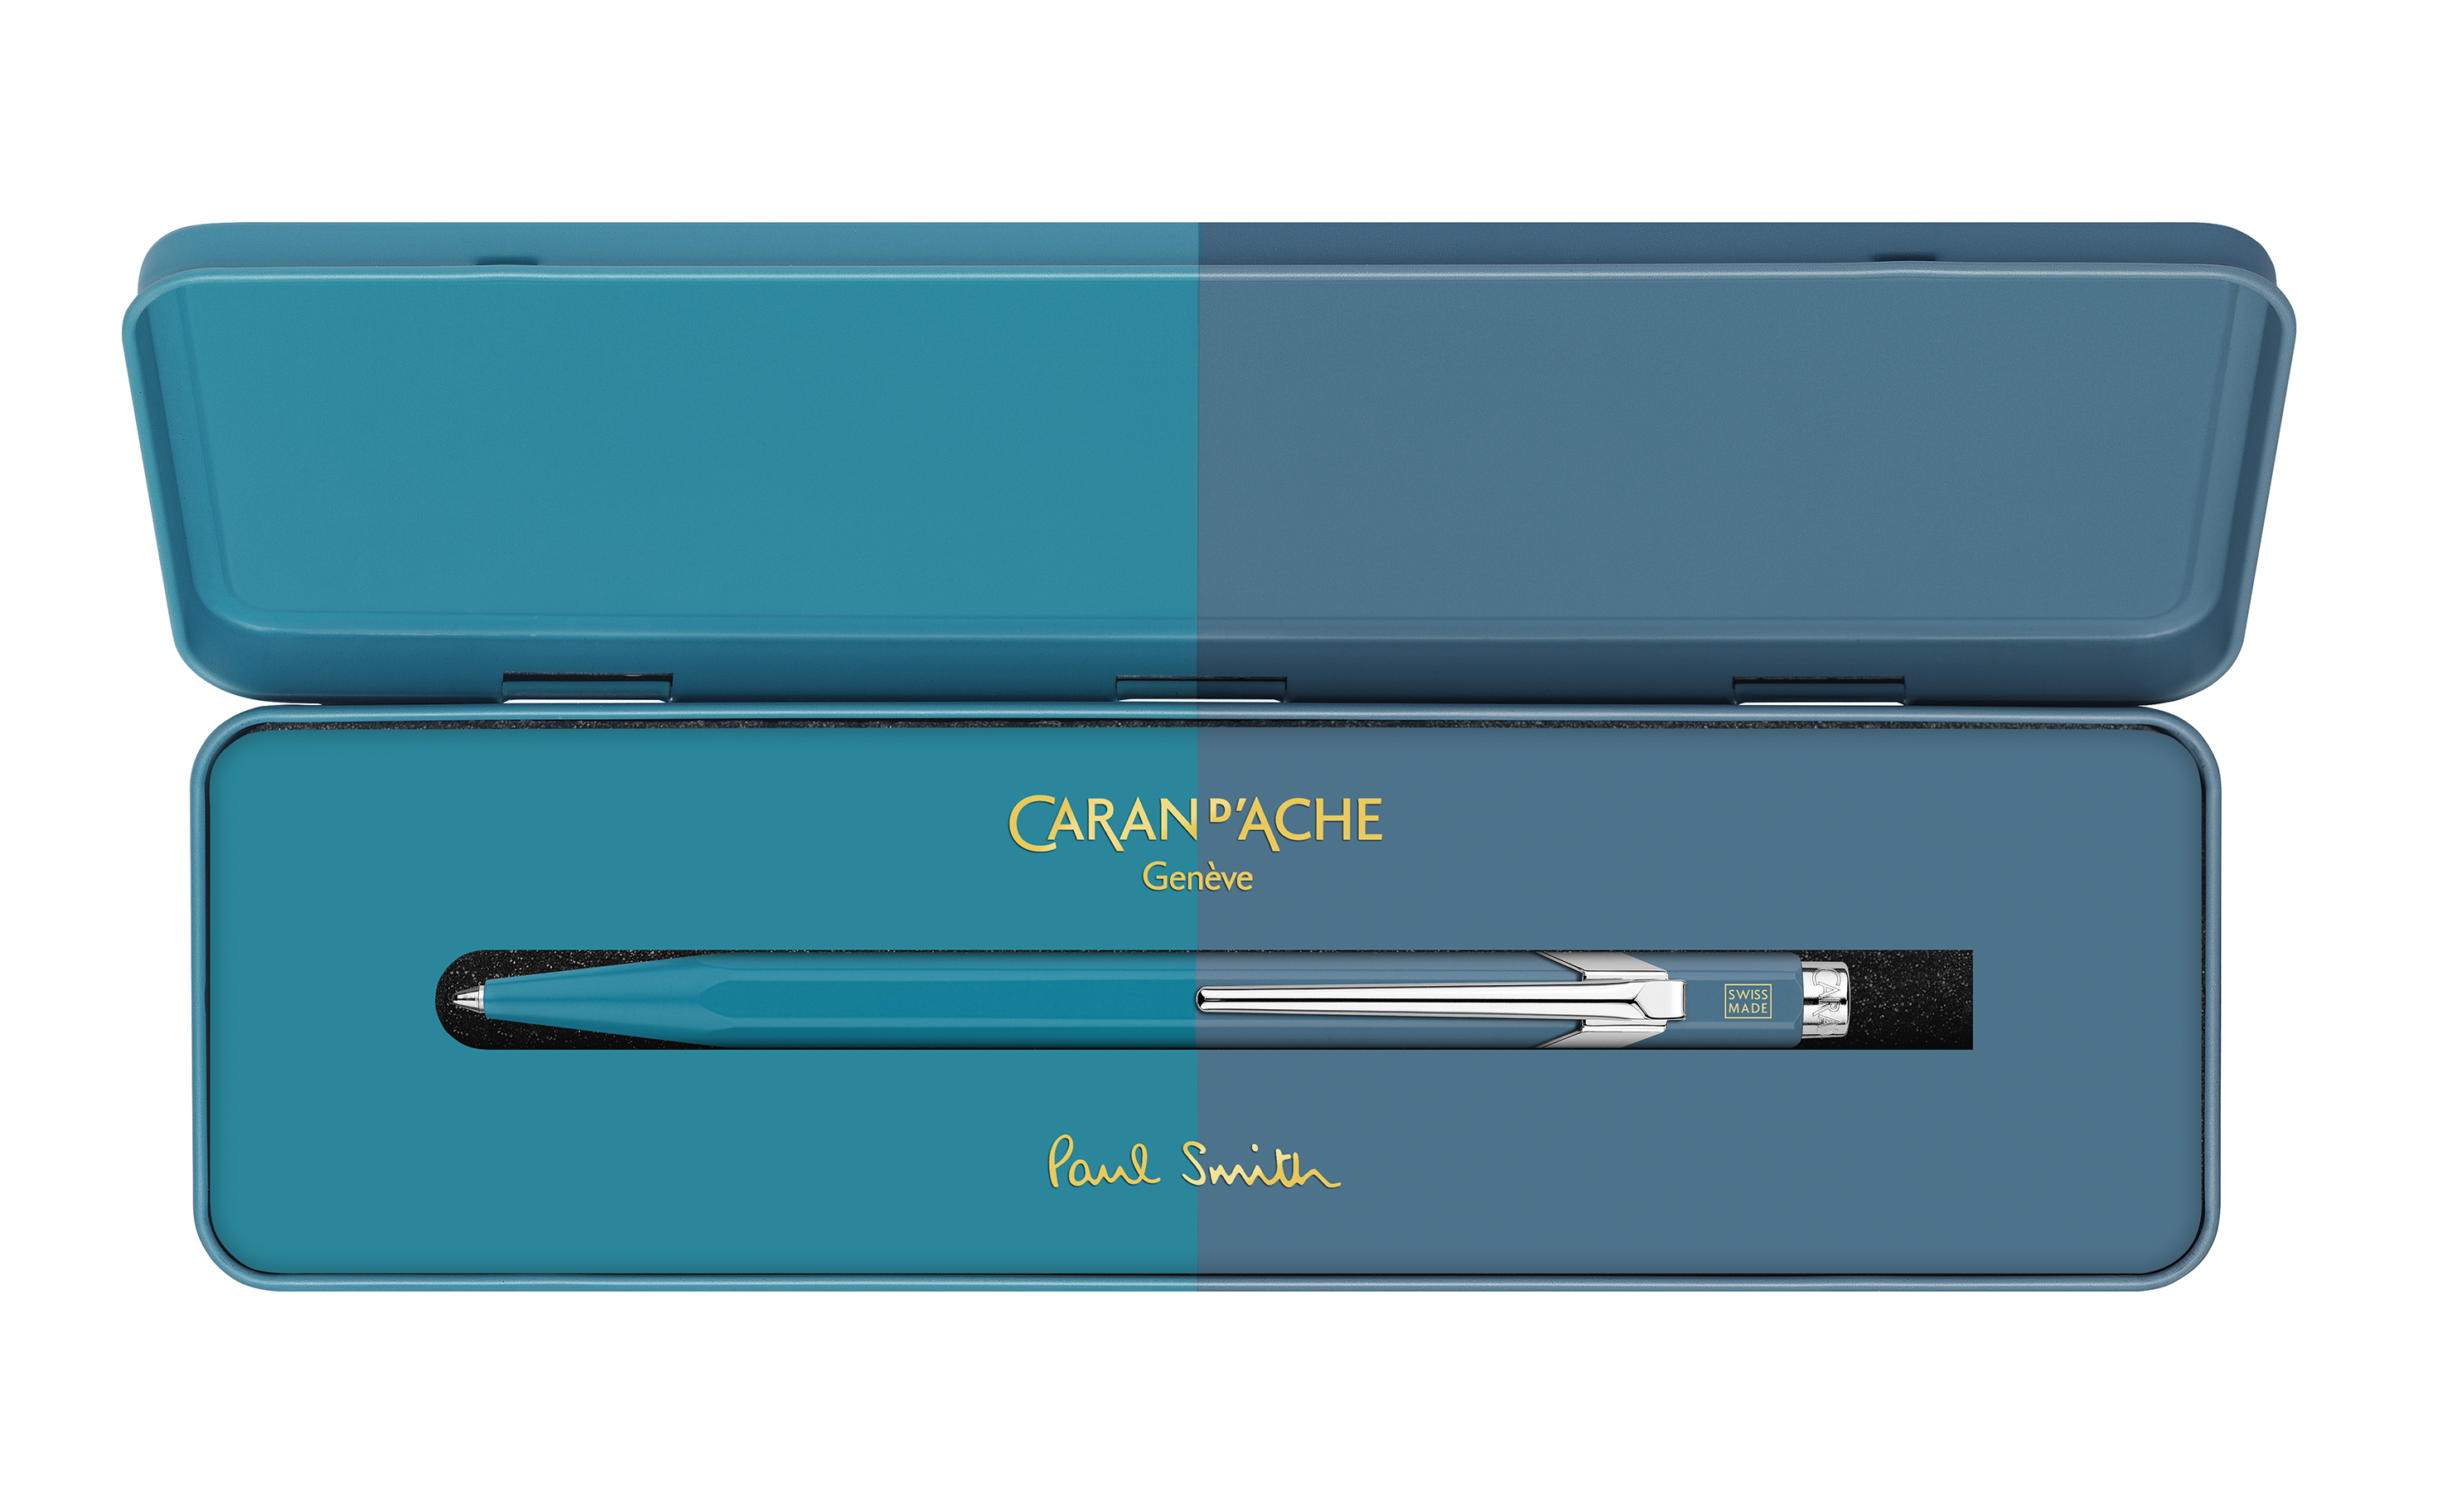 ballpoint pen 849 collaboration paul smith fourth edition colours cyan and steel in its metal case